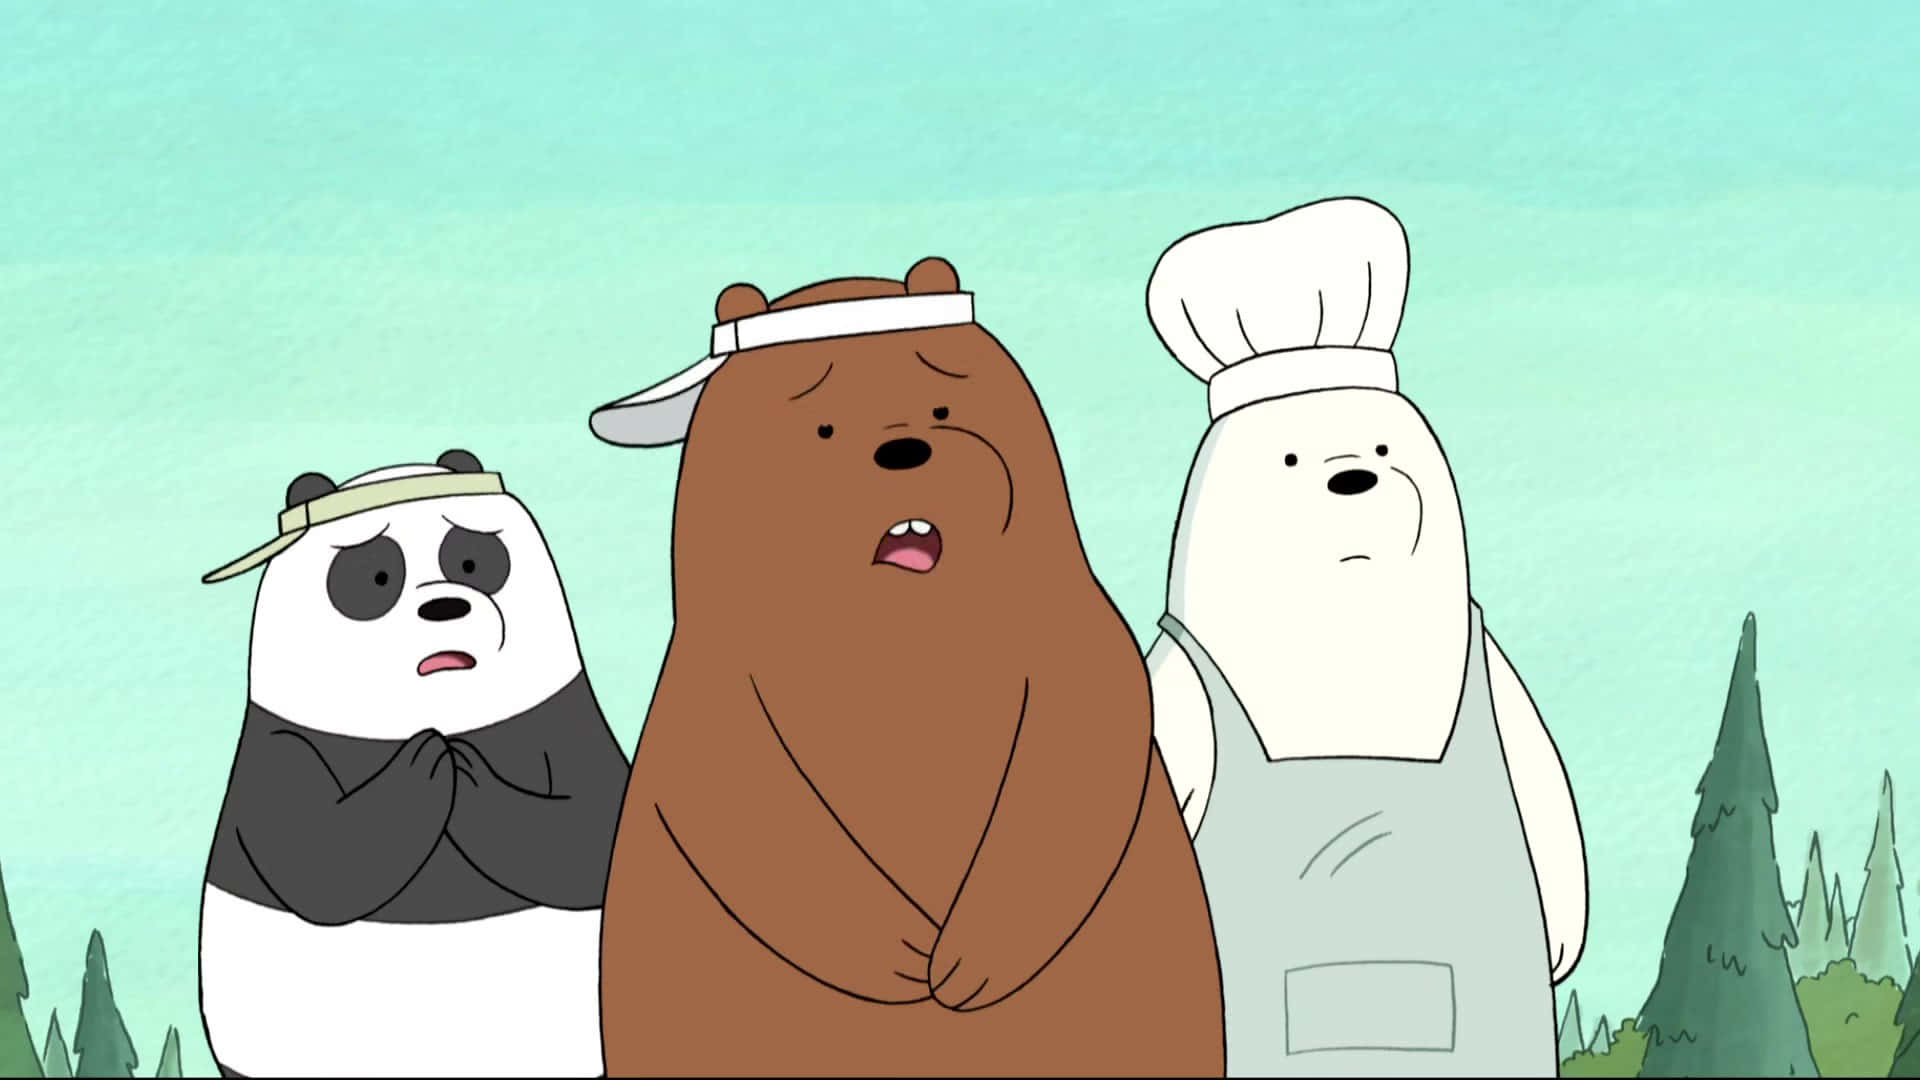 Ice Bear and his brothers enjoy a day of relaxation.